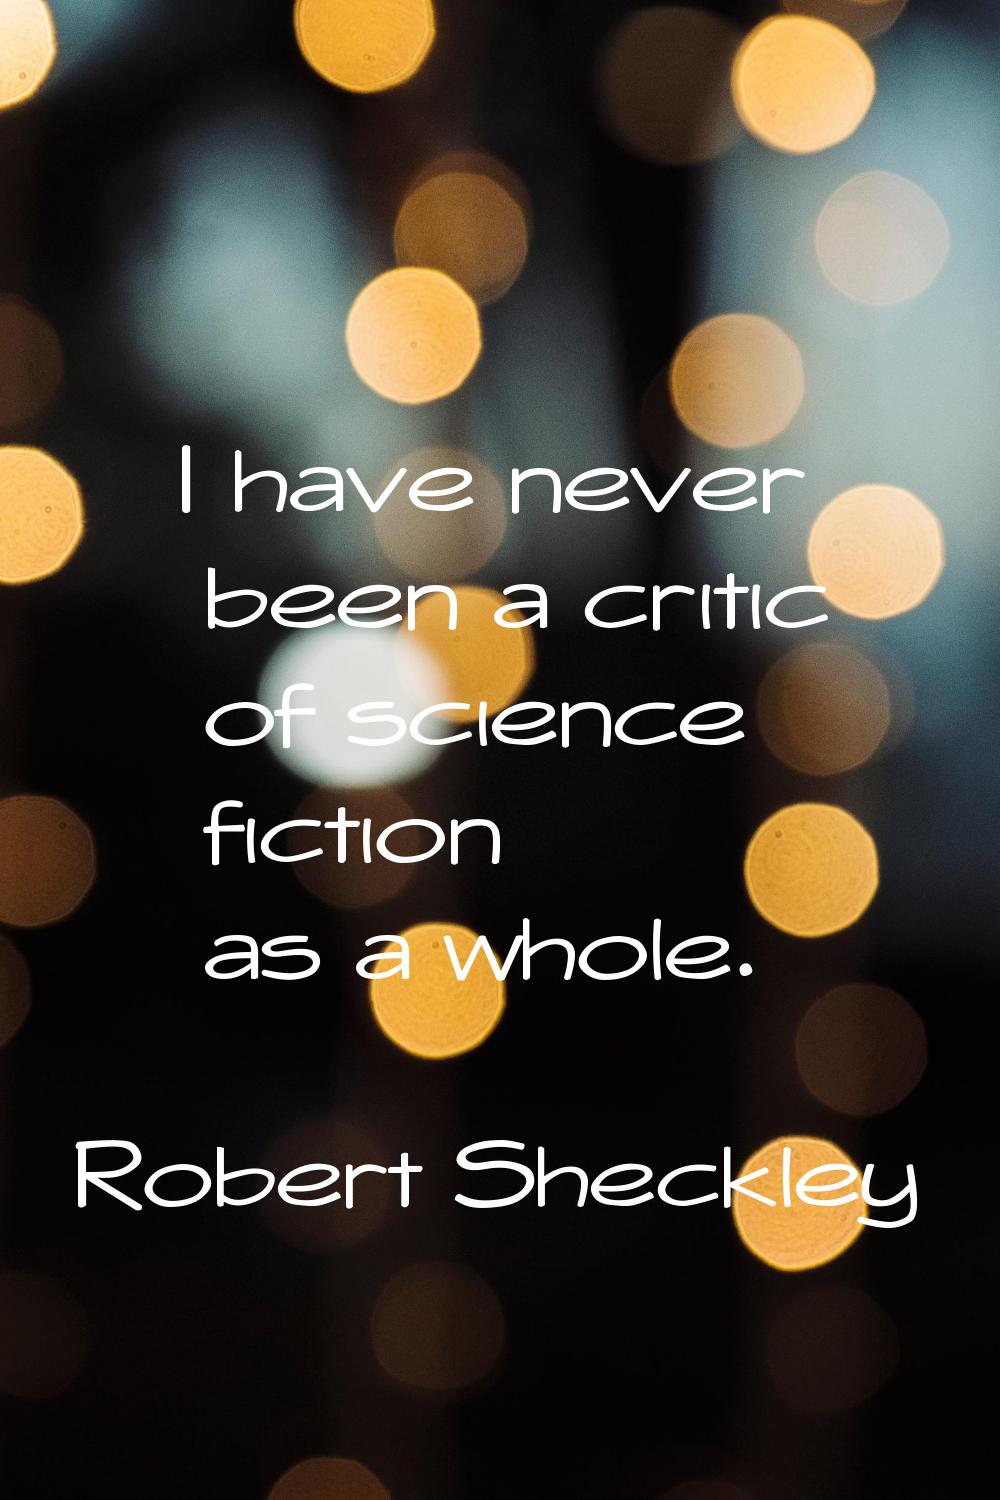 I have never been a critic of science fiction as a whole.